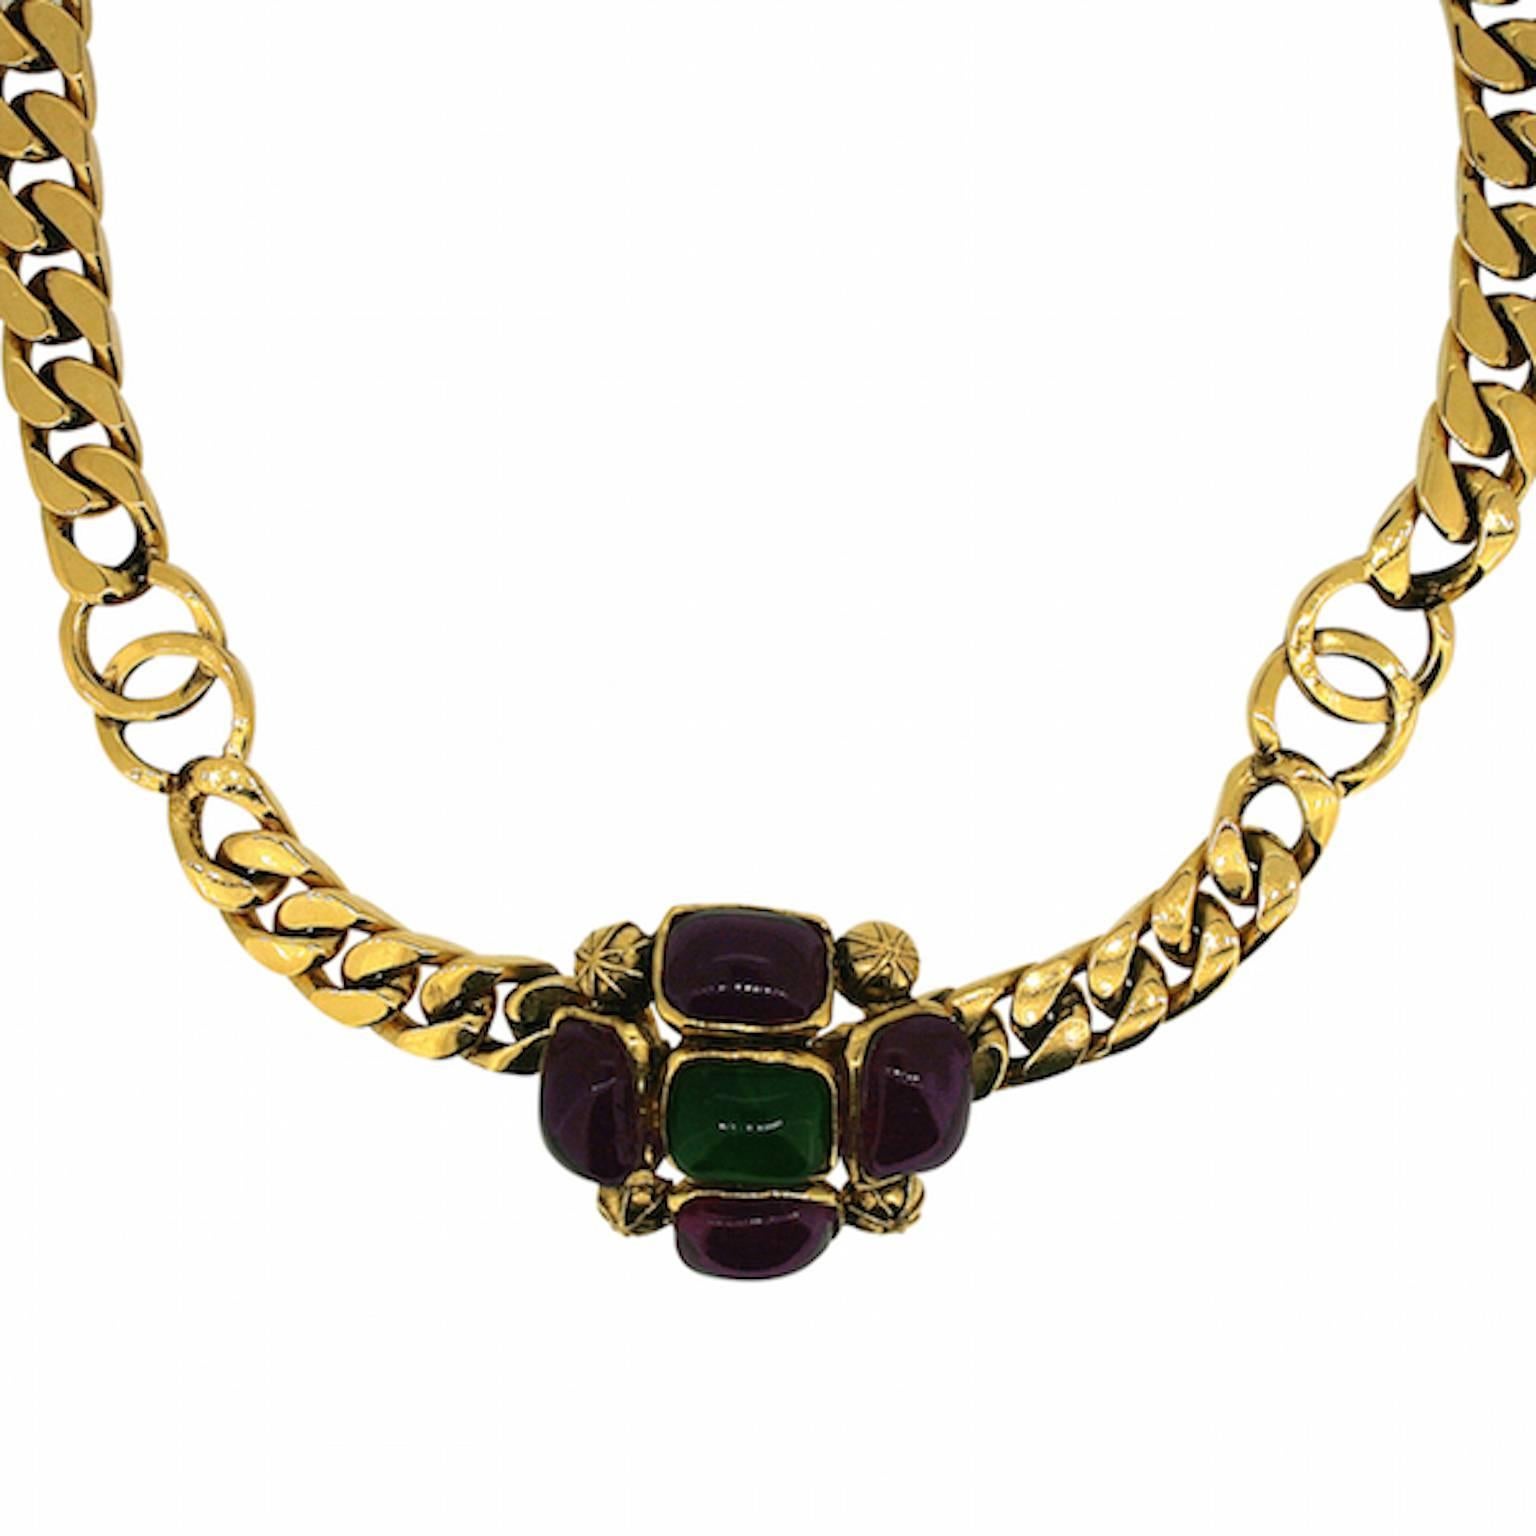 This show-stopping necklace is a fine example of Chanel's craftsmanship. It features a beautiful design.
Condition Report:
Excellent
The Details...
This gold plated necklace features a curb link chain detailed with the famed Chanel interlocking 'C'